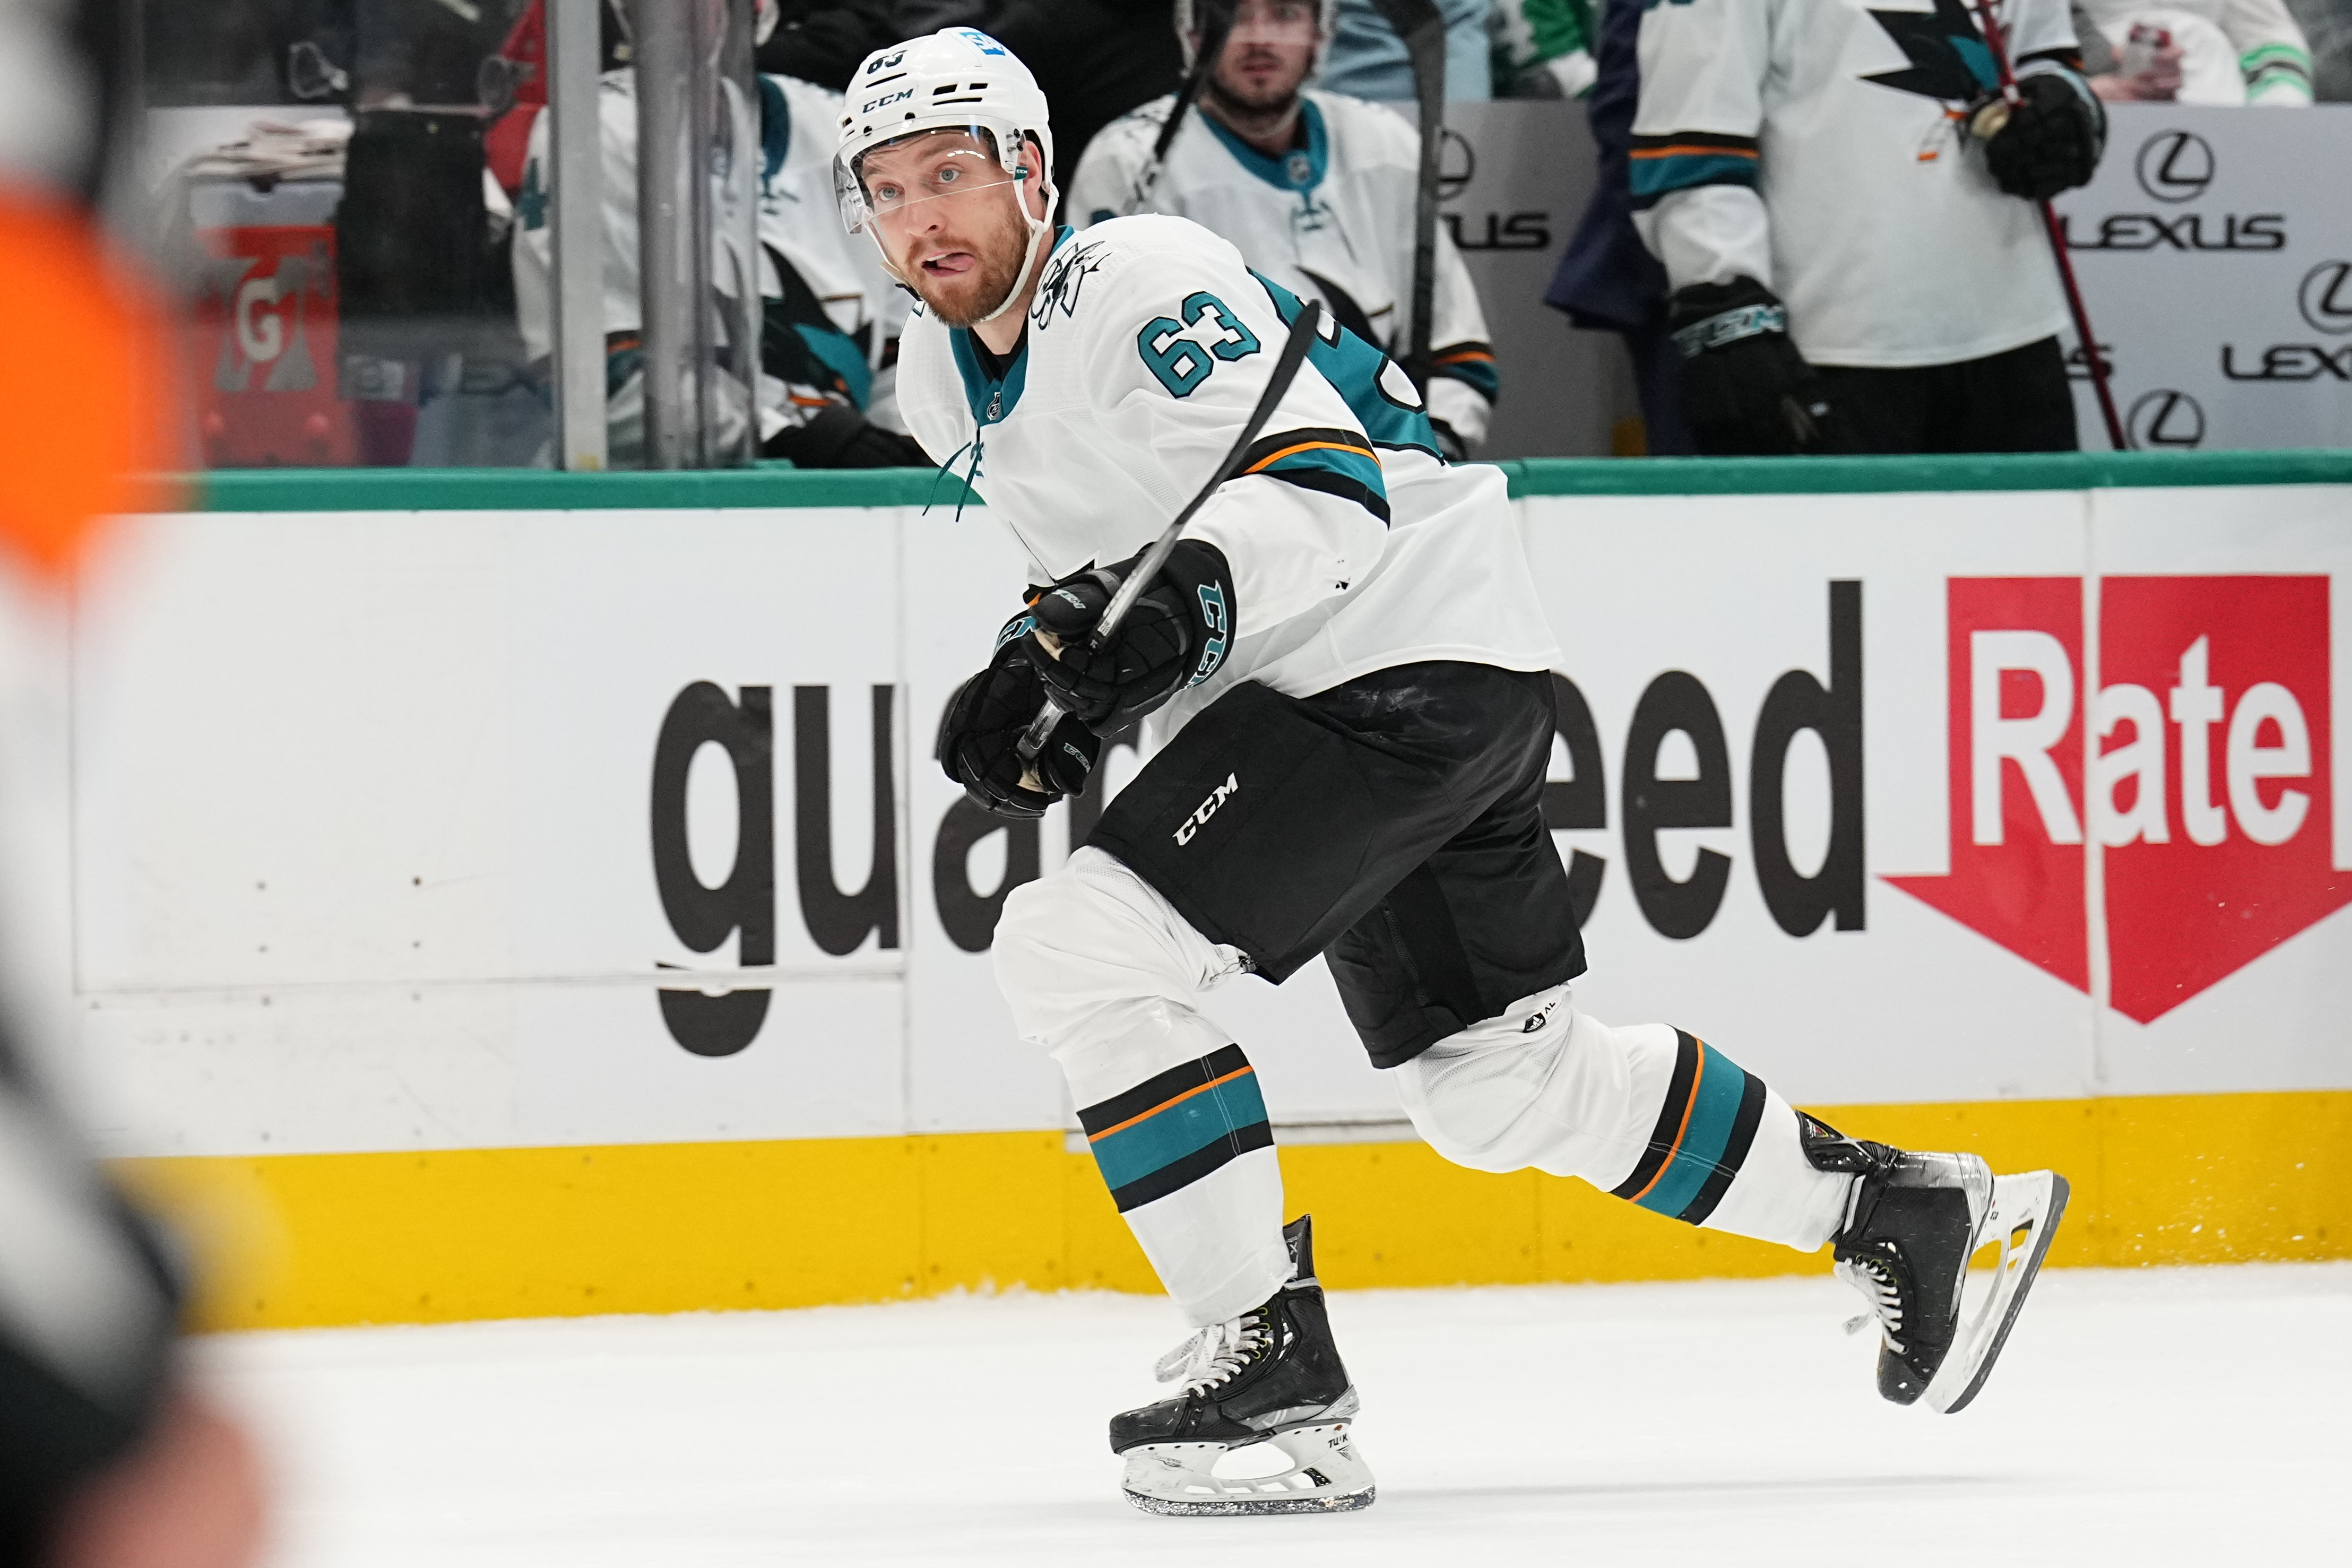 Jeffrey Viel #63 of the San Jose Sharks skates against the Dallas Stars at the American Airlines Center on April 16, 2022 in Dallas, Texas.